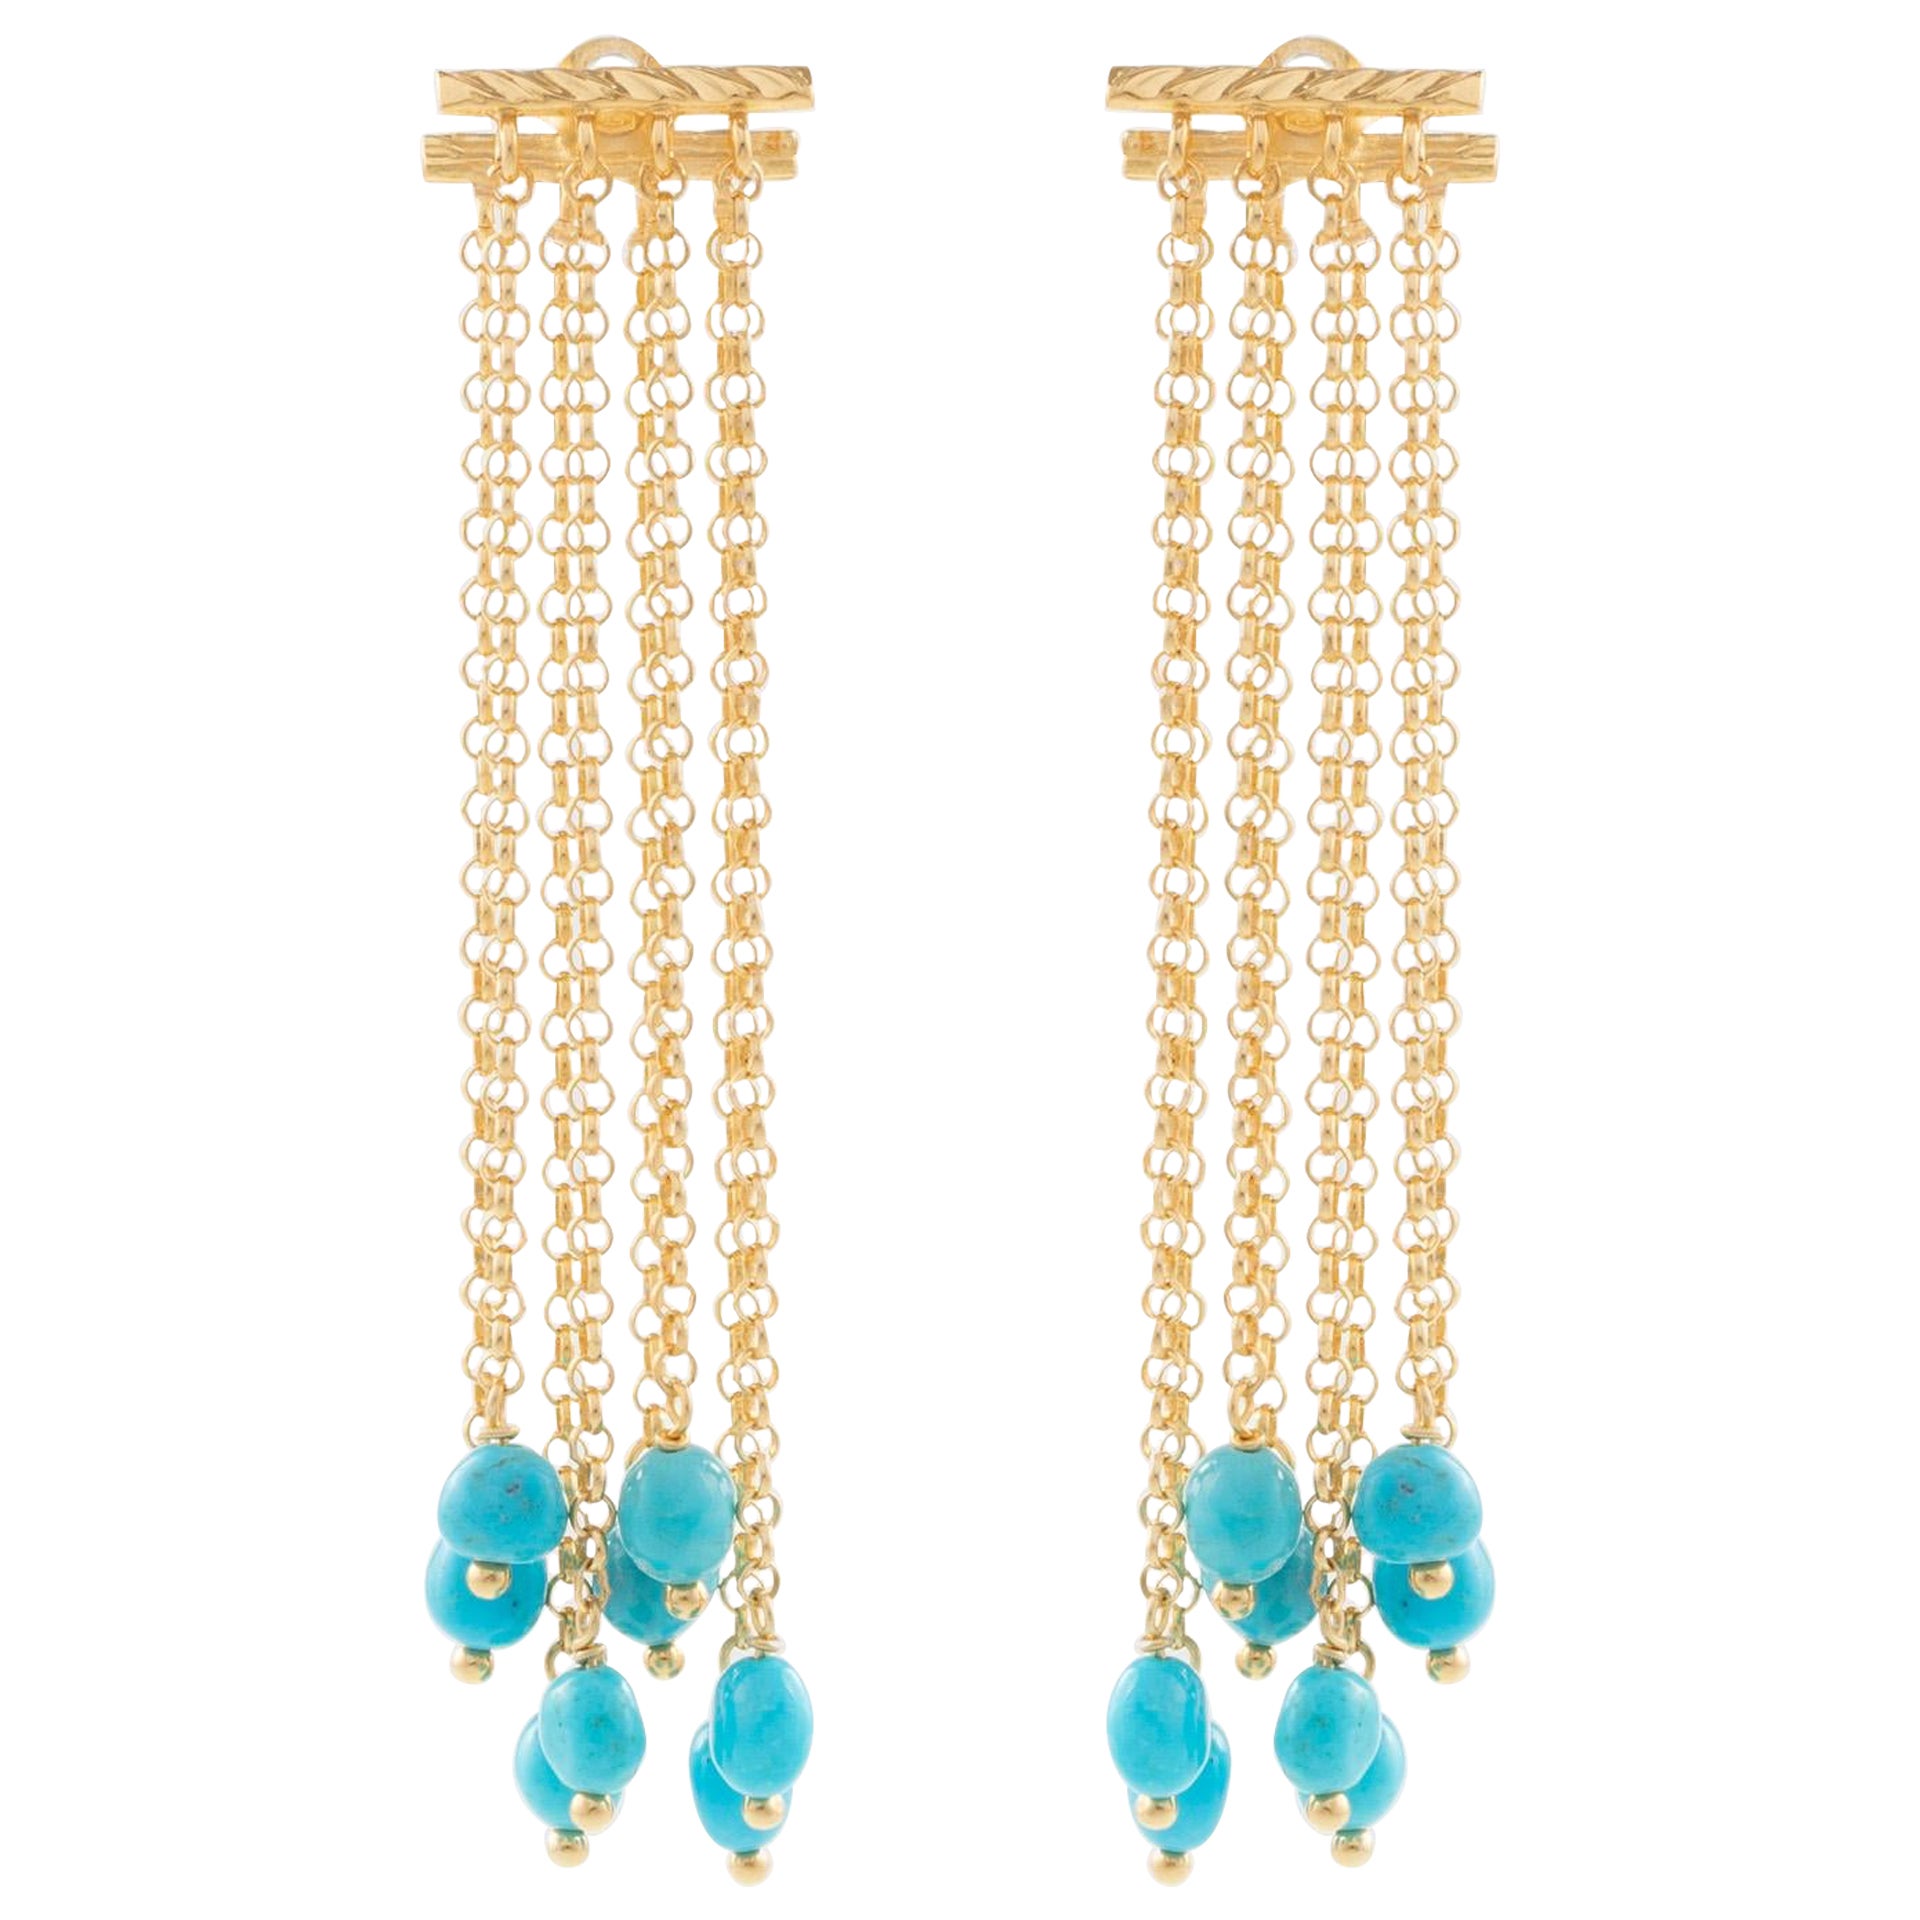 Earrings, 925 sterling silver, 18 kt. gold plated, natural turquoise, turquoise 